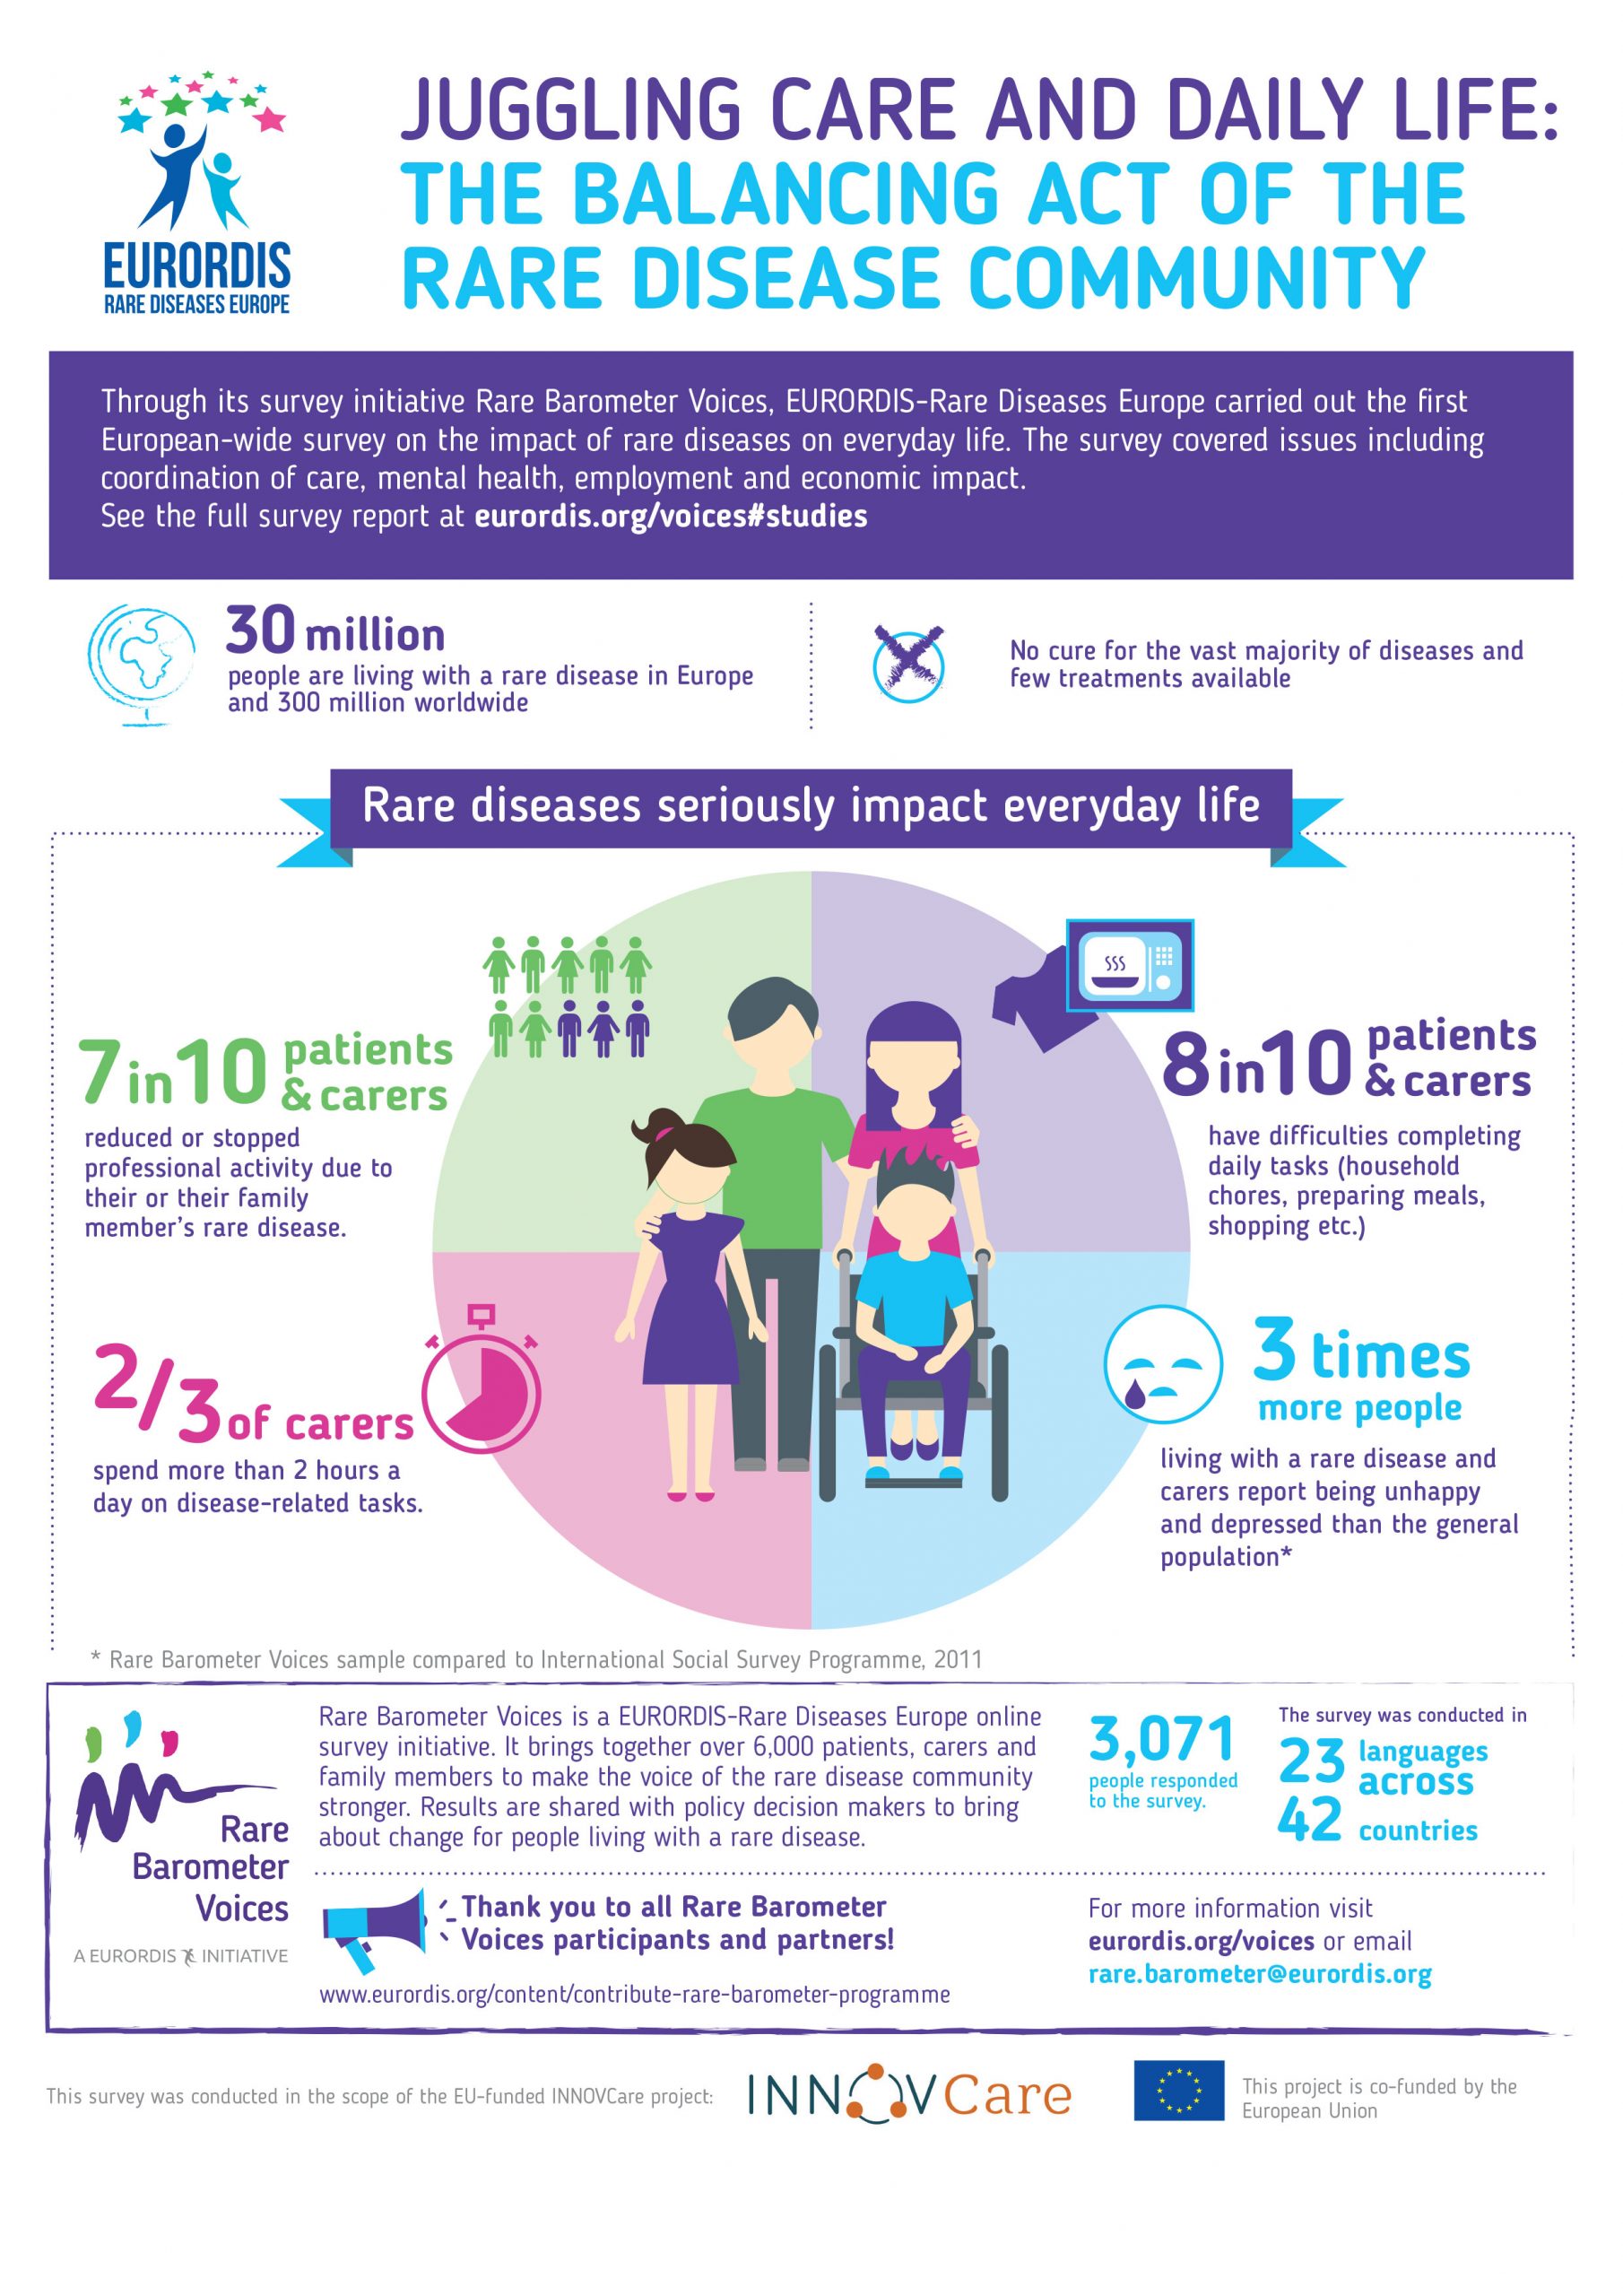 Juggling care and daily life: The balancing act of the rare disease community – Infographic